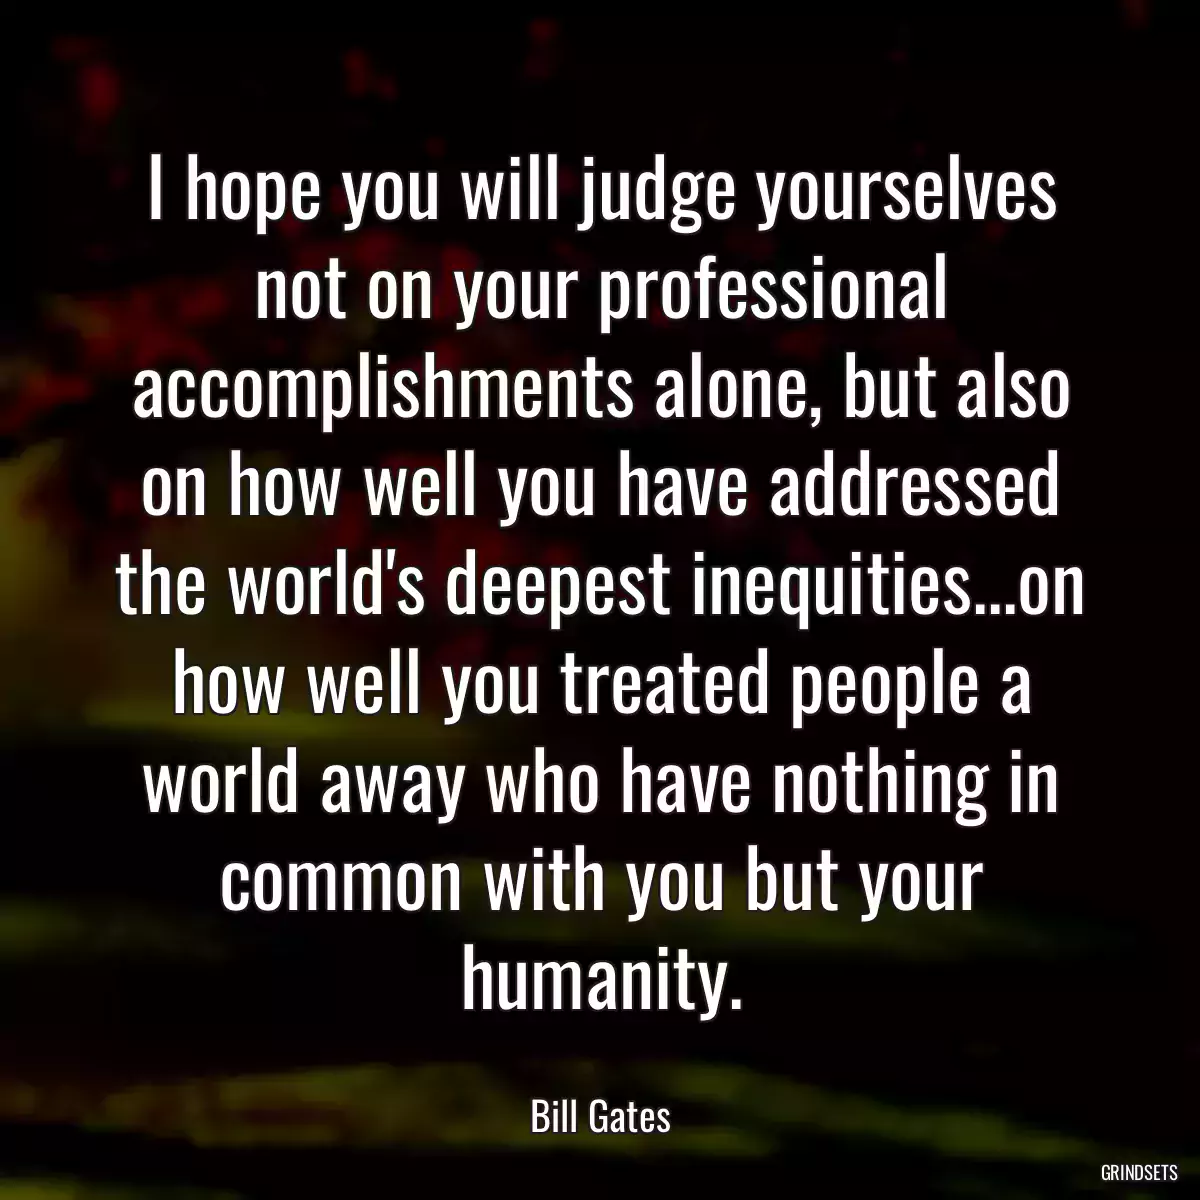 I hope you will judge yourselves not on your professional accomplishments alone, but also on how well you have addressed the world\'s deepest inequities...on how well you treated people a world away who have nothing in common with you but your humanity.